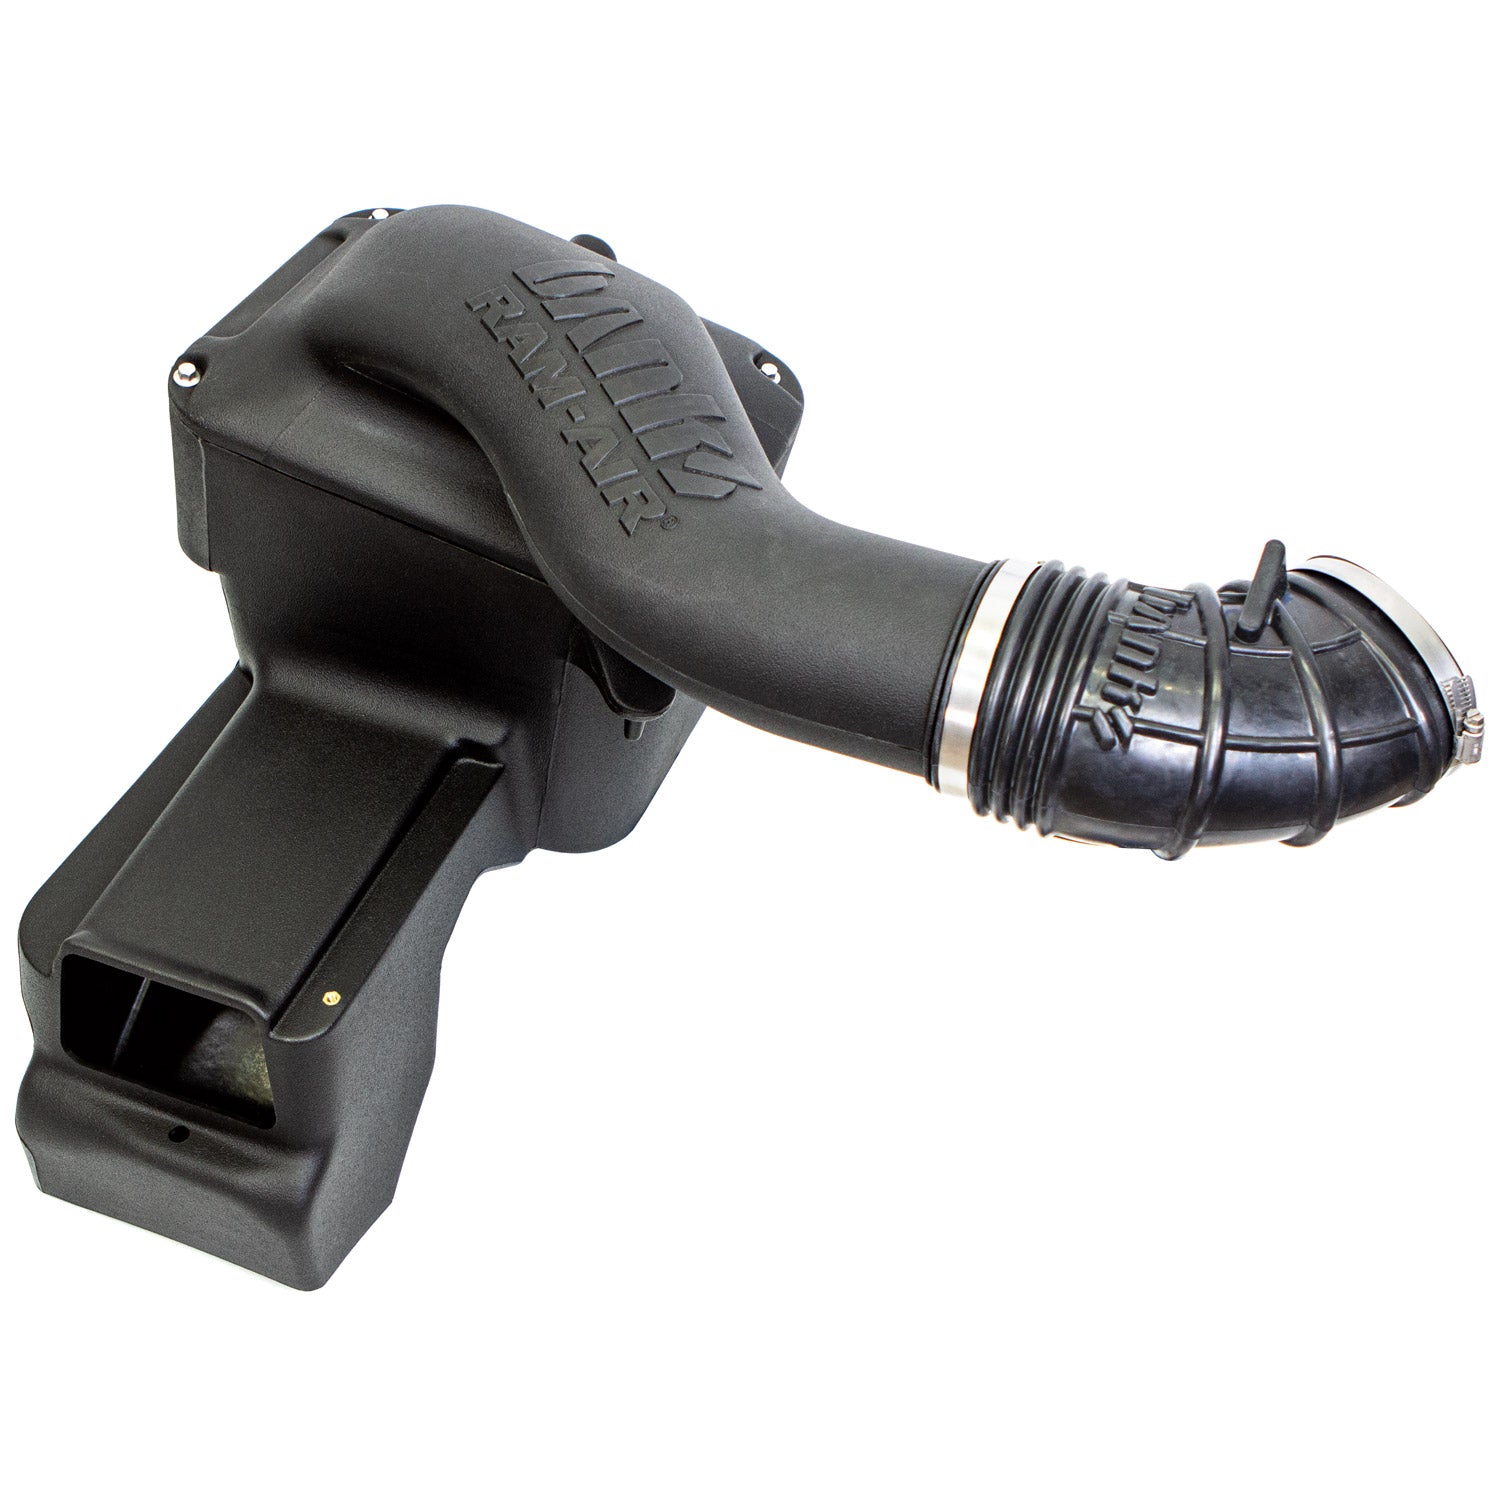 Assembled photo of the Banks Ram-Air intake for 2017-2019 Ford Super Duty 6.7L